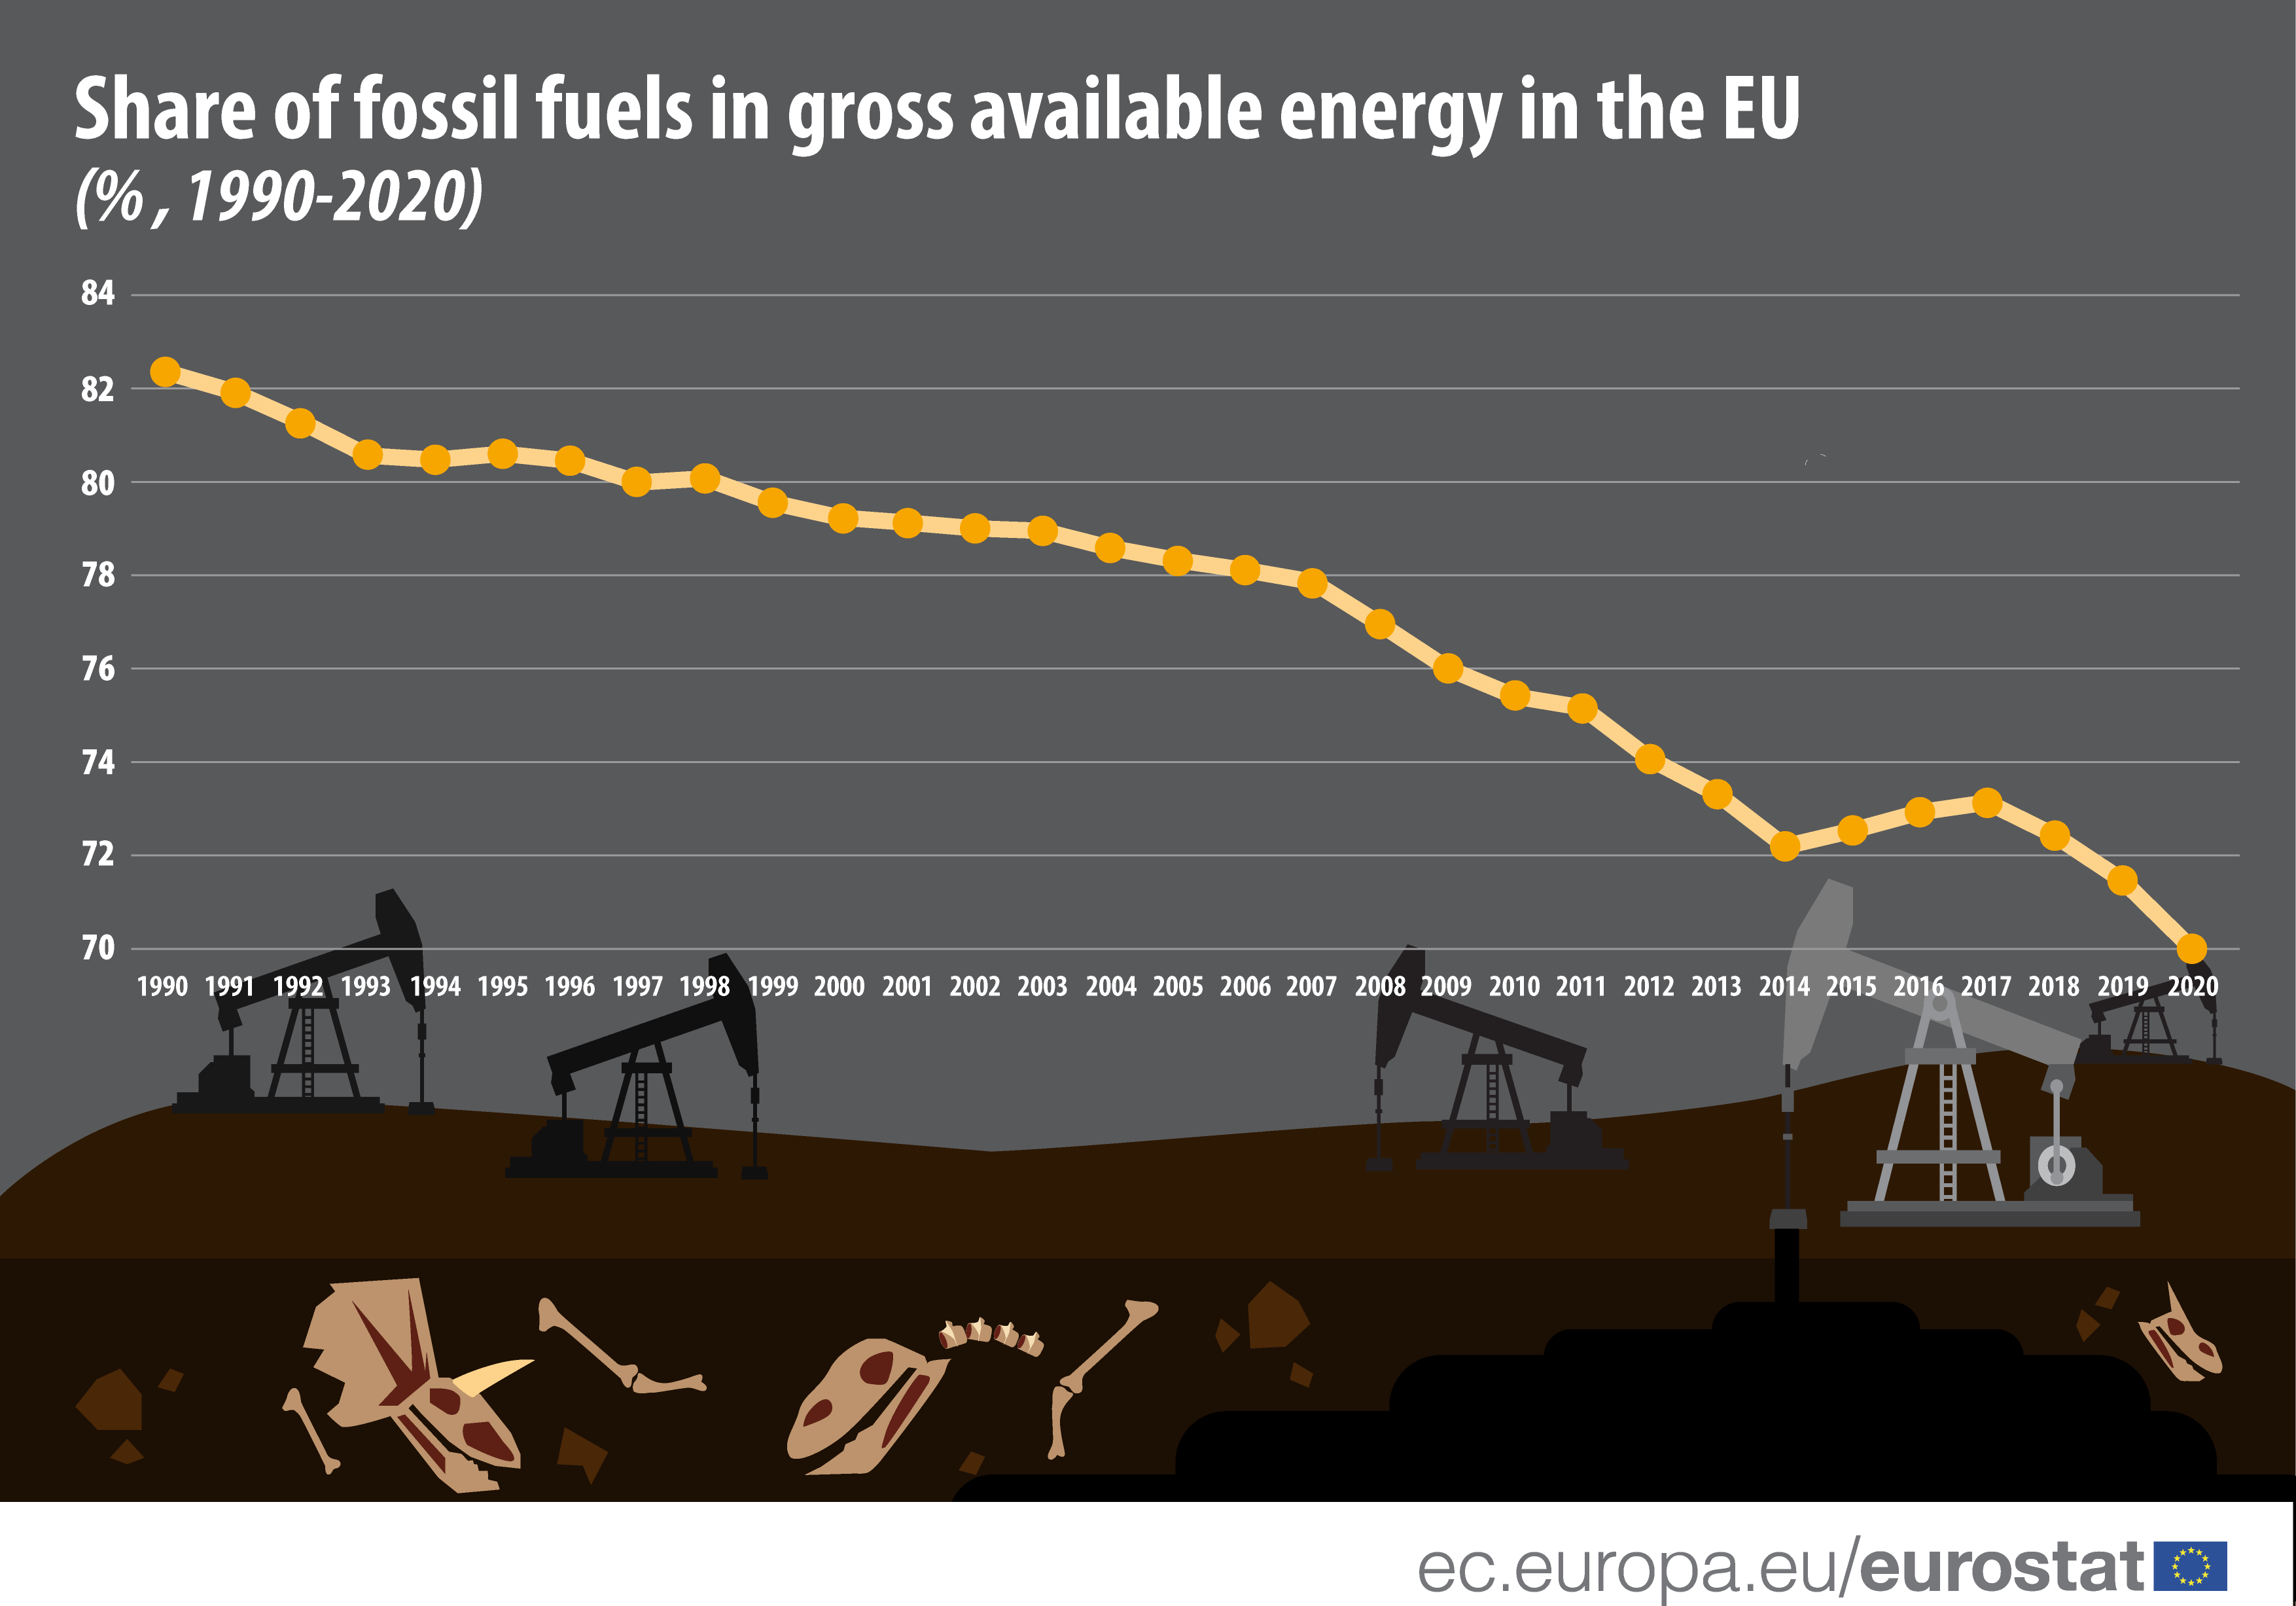 Line graph: Share of fossil fuels in gross available energy in the EU, as %, from 1990 to 2020